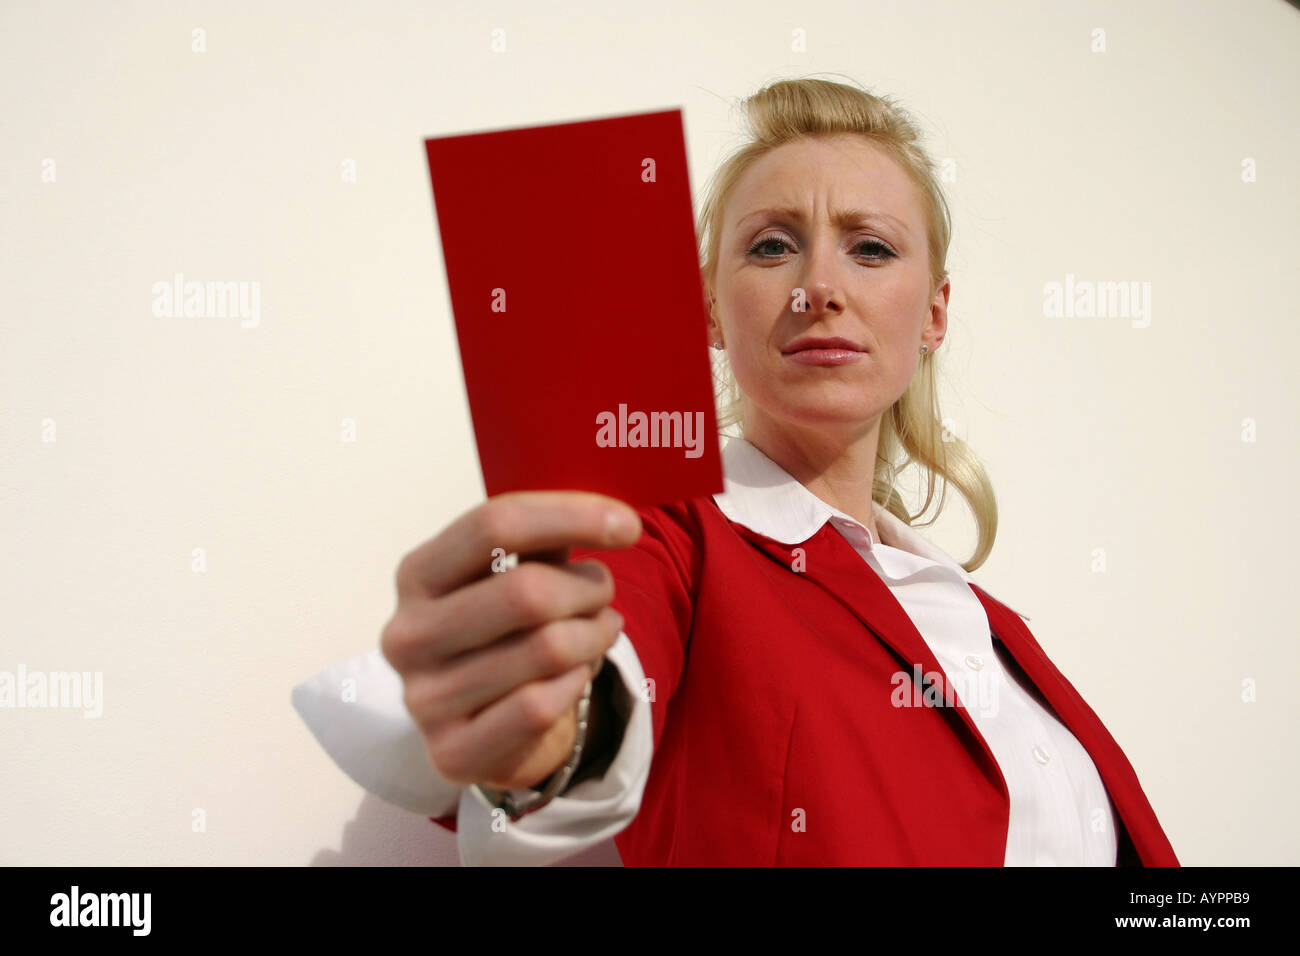 A woman wearing a red coat holds a red card in front of the camera Stock Photo